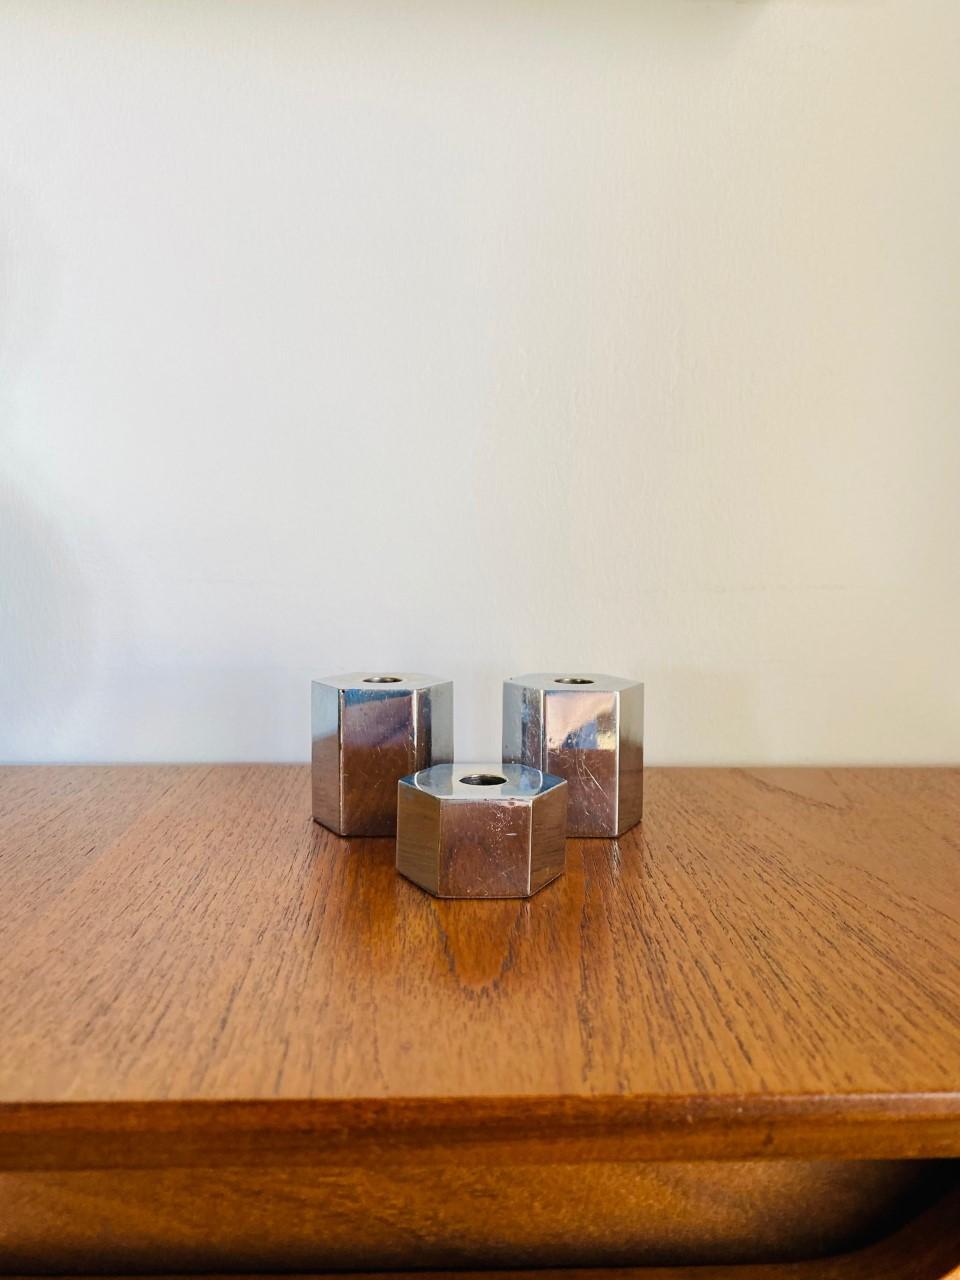 Stylish set of 3 chromed metal hexagonal candle holders. The set can be set aside with each piece of placed apart. The hexagonal design and chrome finish give a very industrial clean aesthetic. These pieces are from the 1980s and exhibit some